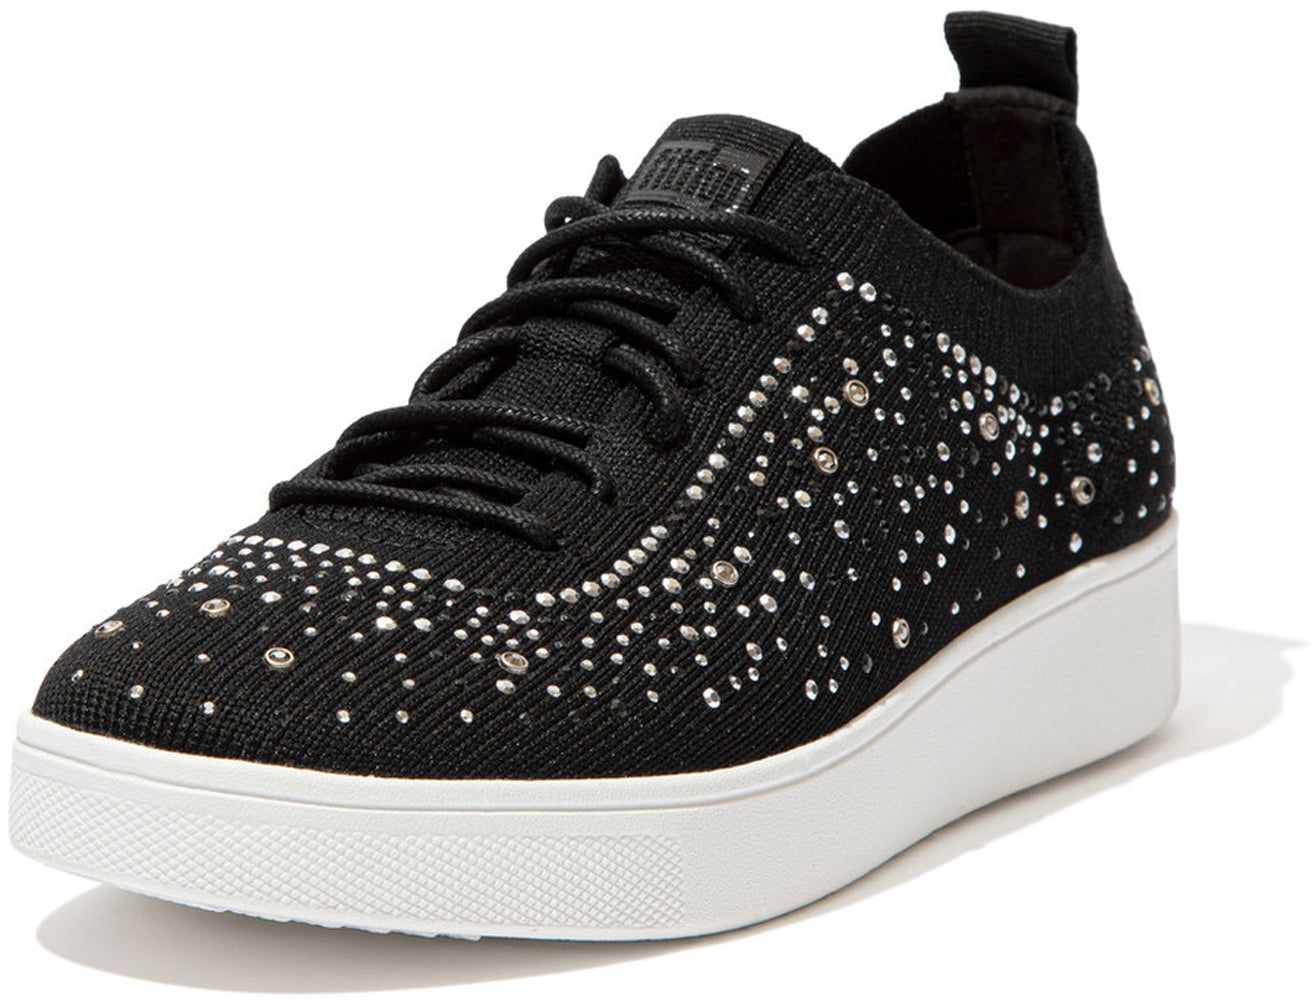 Women's FitFlop Rally Ombre Crystal Knit Sneaker in Black from the side view